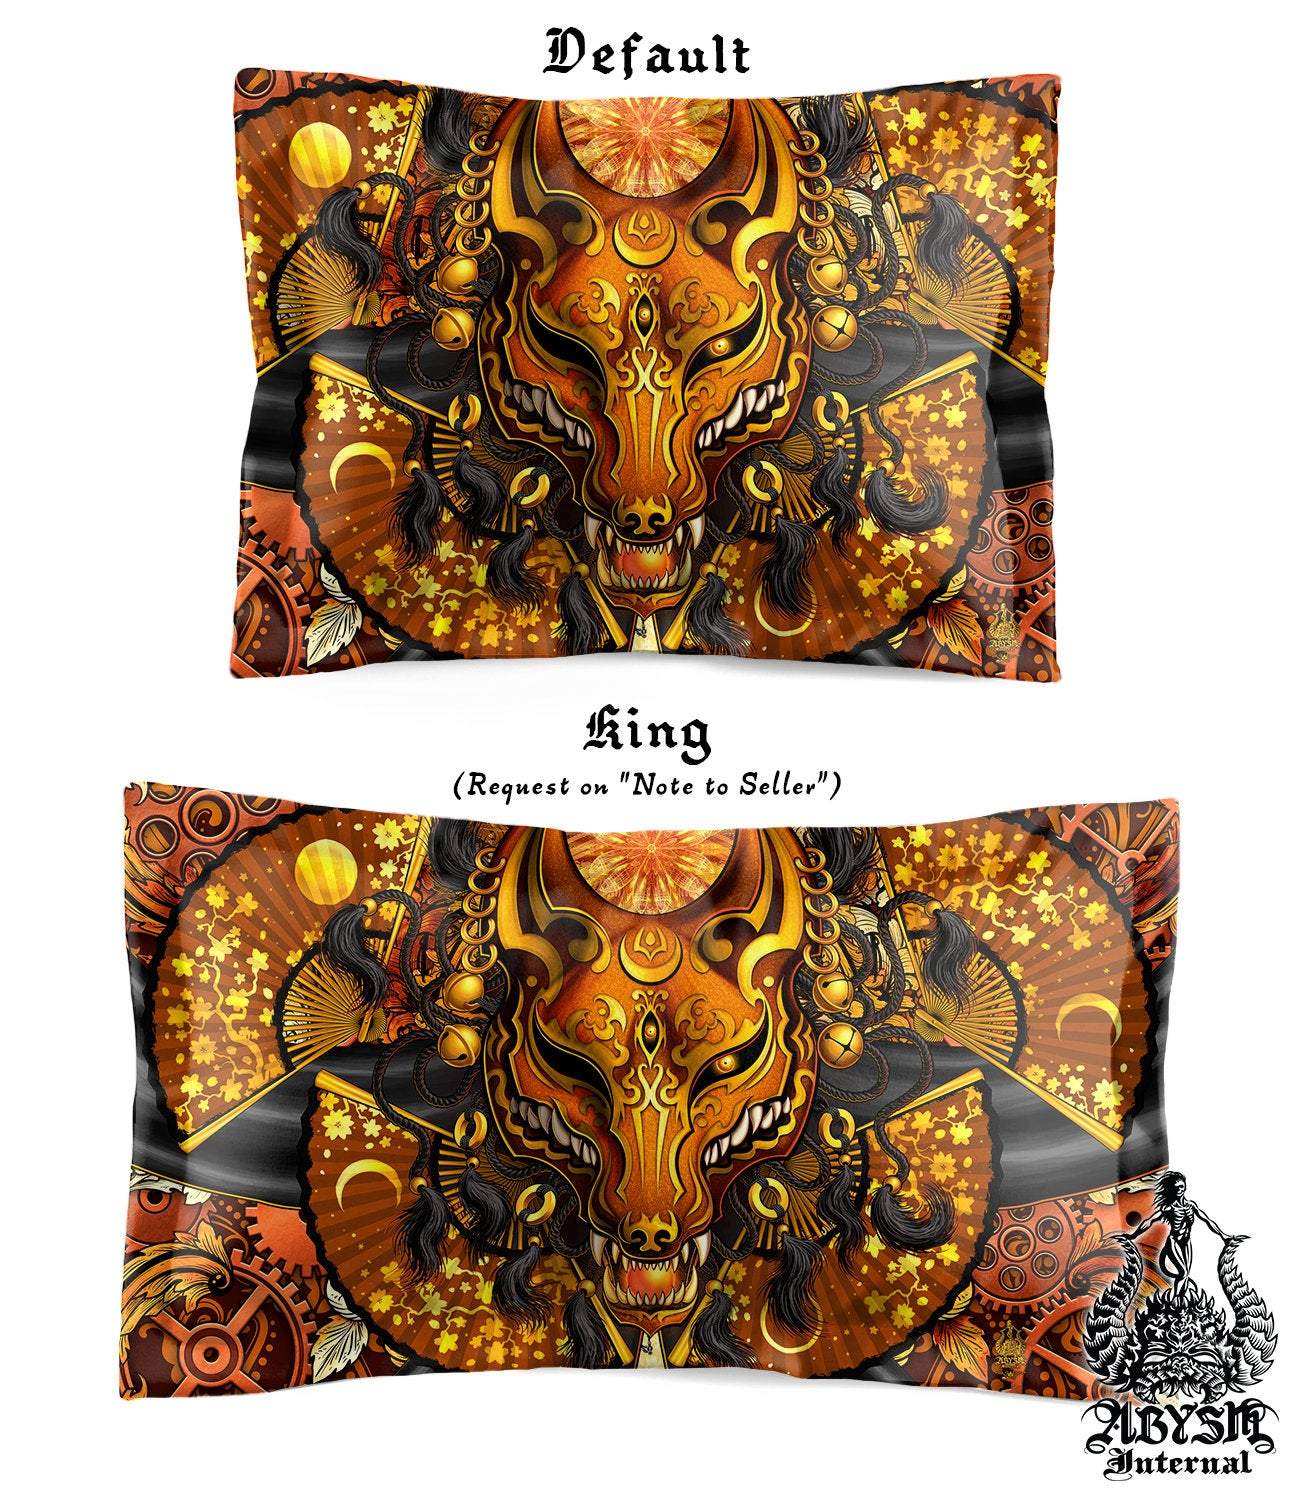 Kitsune Mask Bedding Set, Comforter and Duvet, Fox Okami and Anime Bed Cover and Bedroom Decor, King, Queen and Twin Size - Steampunk, Black - Abysm Internal